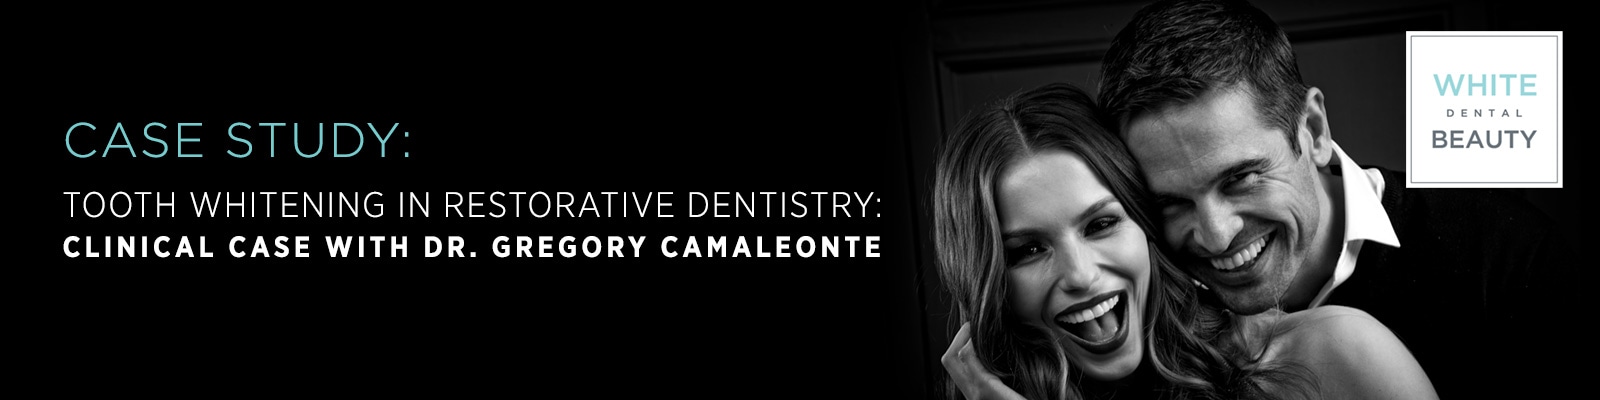 CASE STUDY: Tooth Whitening in Restorative Dentistry: Clinical Case With Dr. Gregory Camaleonte